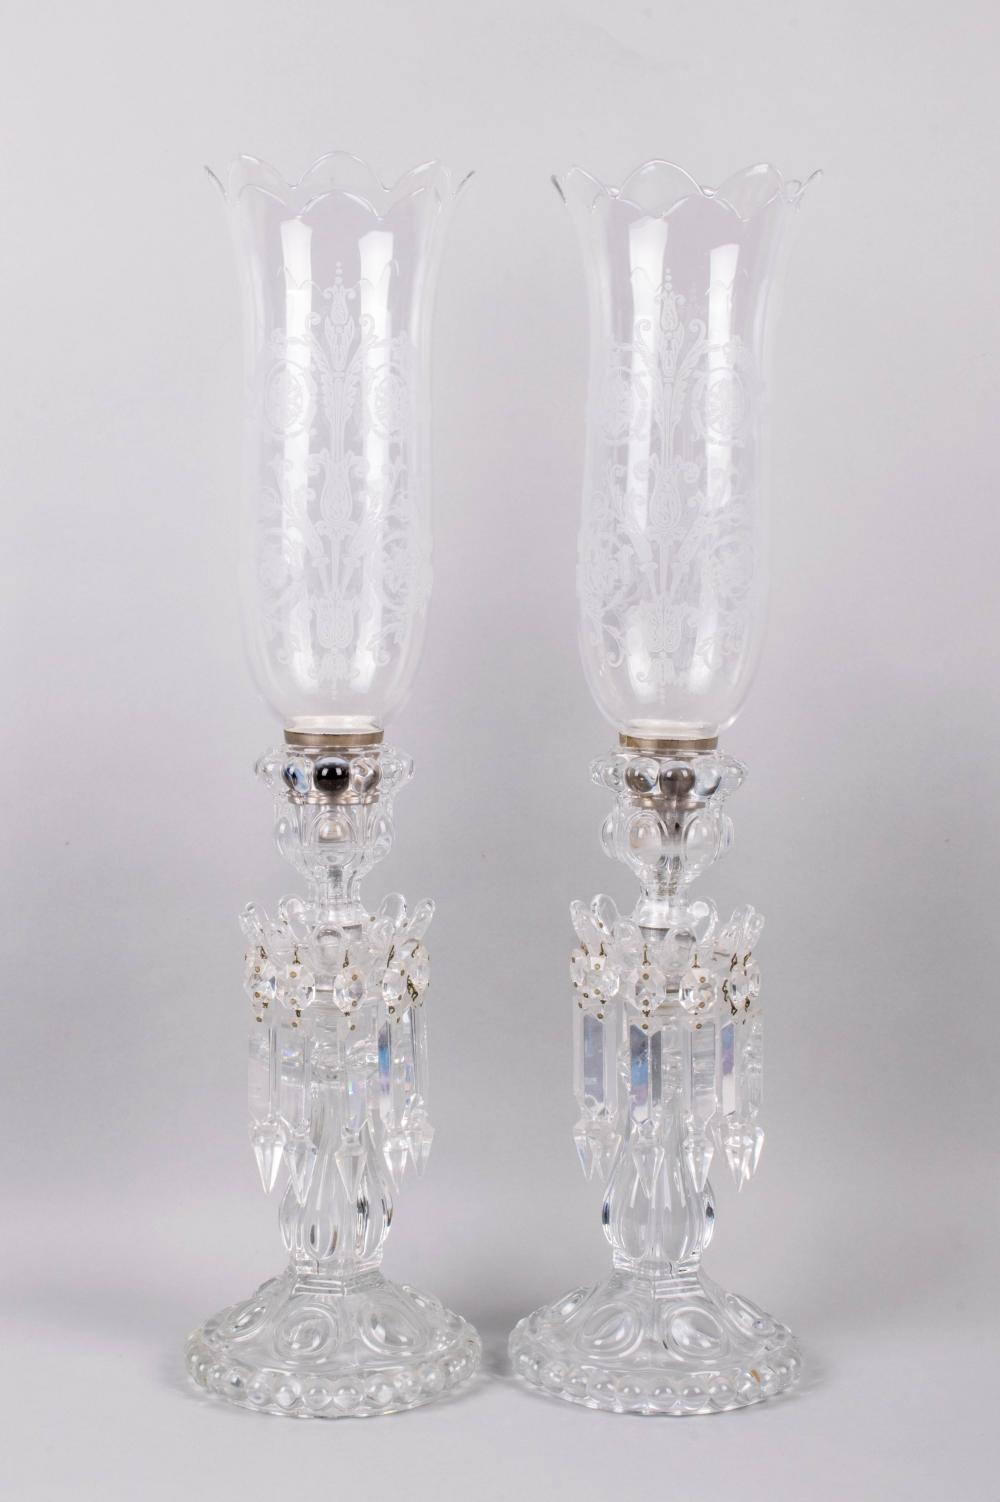 PAIR OF BACCARAT CRYSTAL LUSTERS 33d034